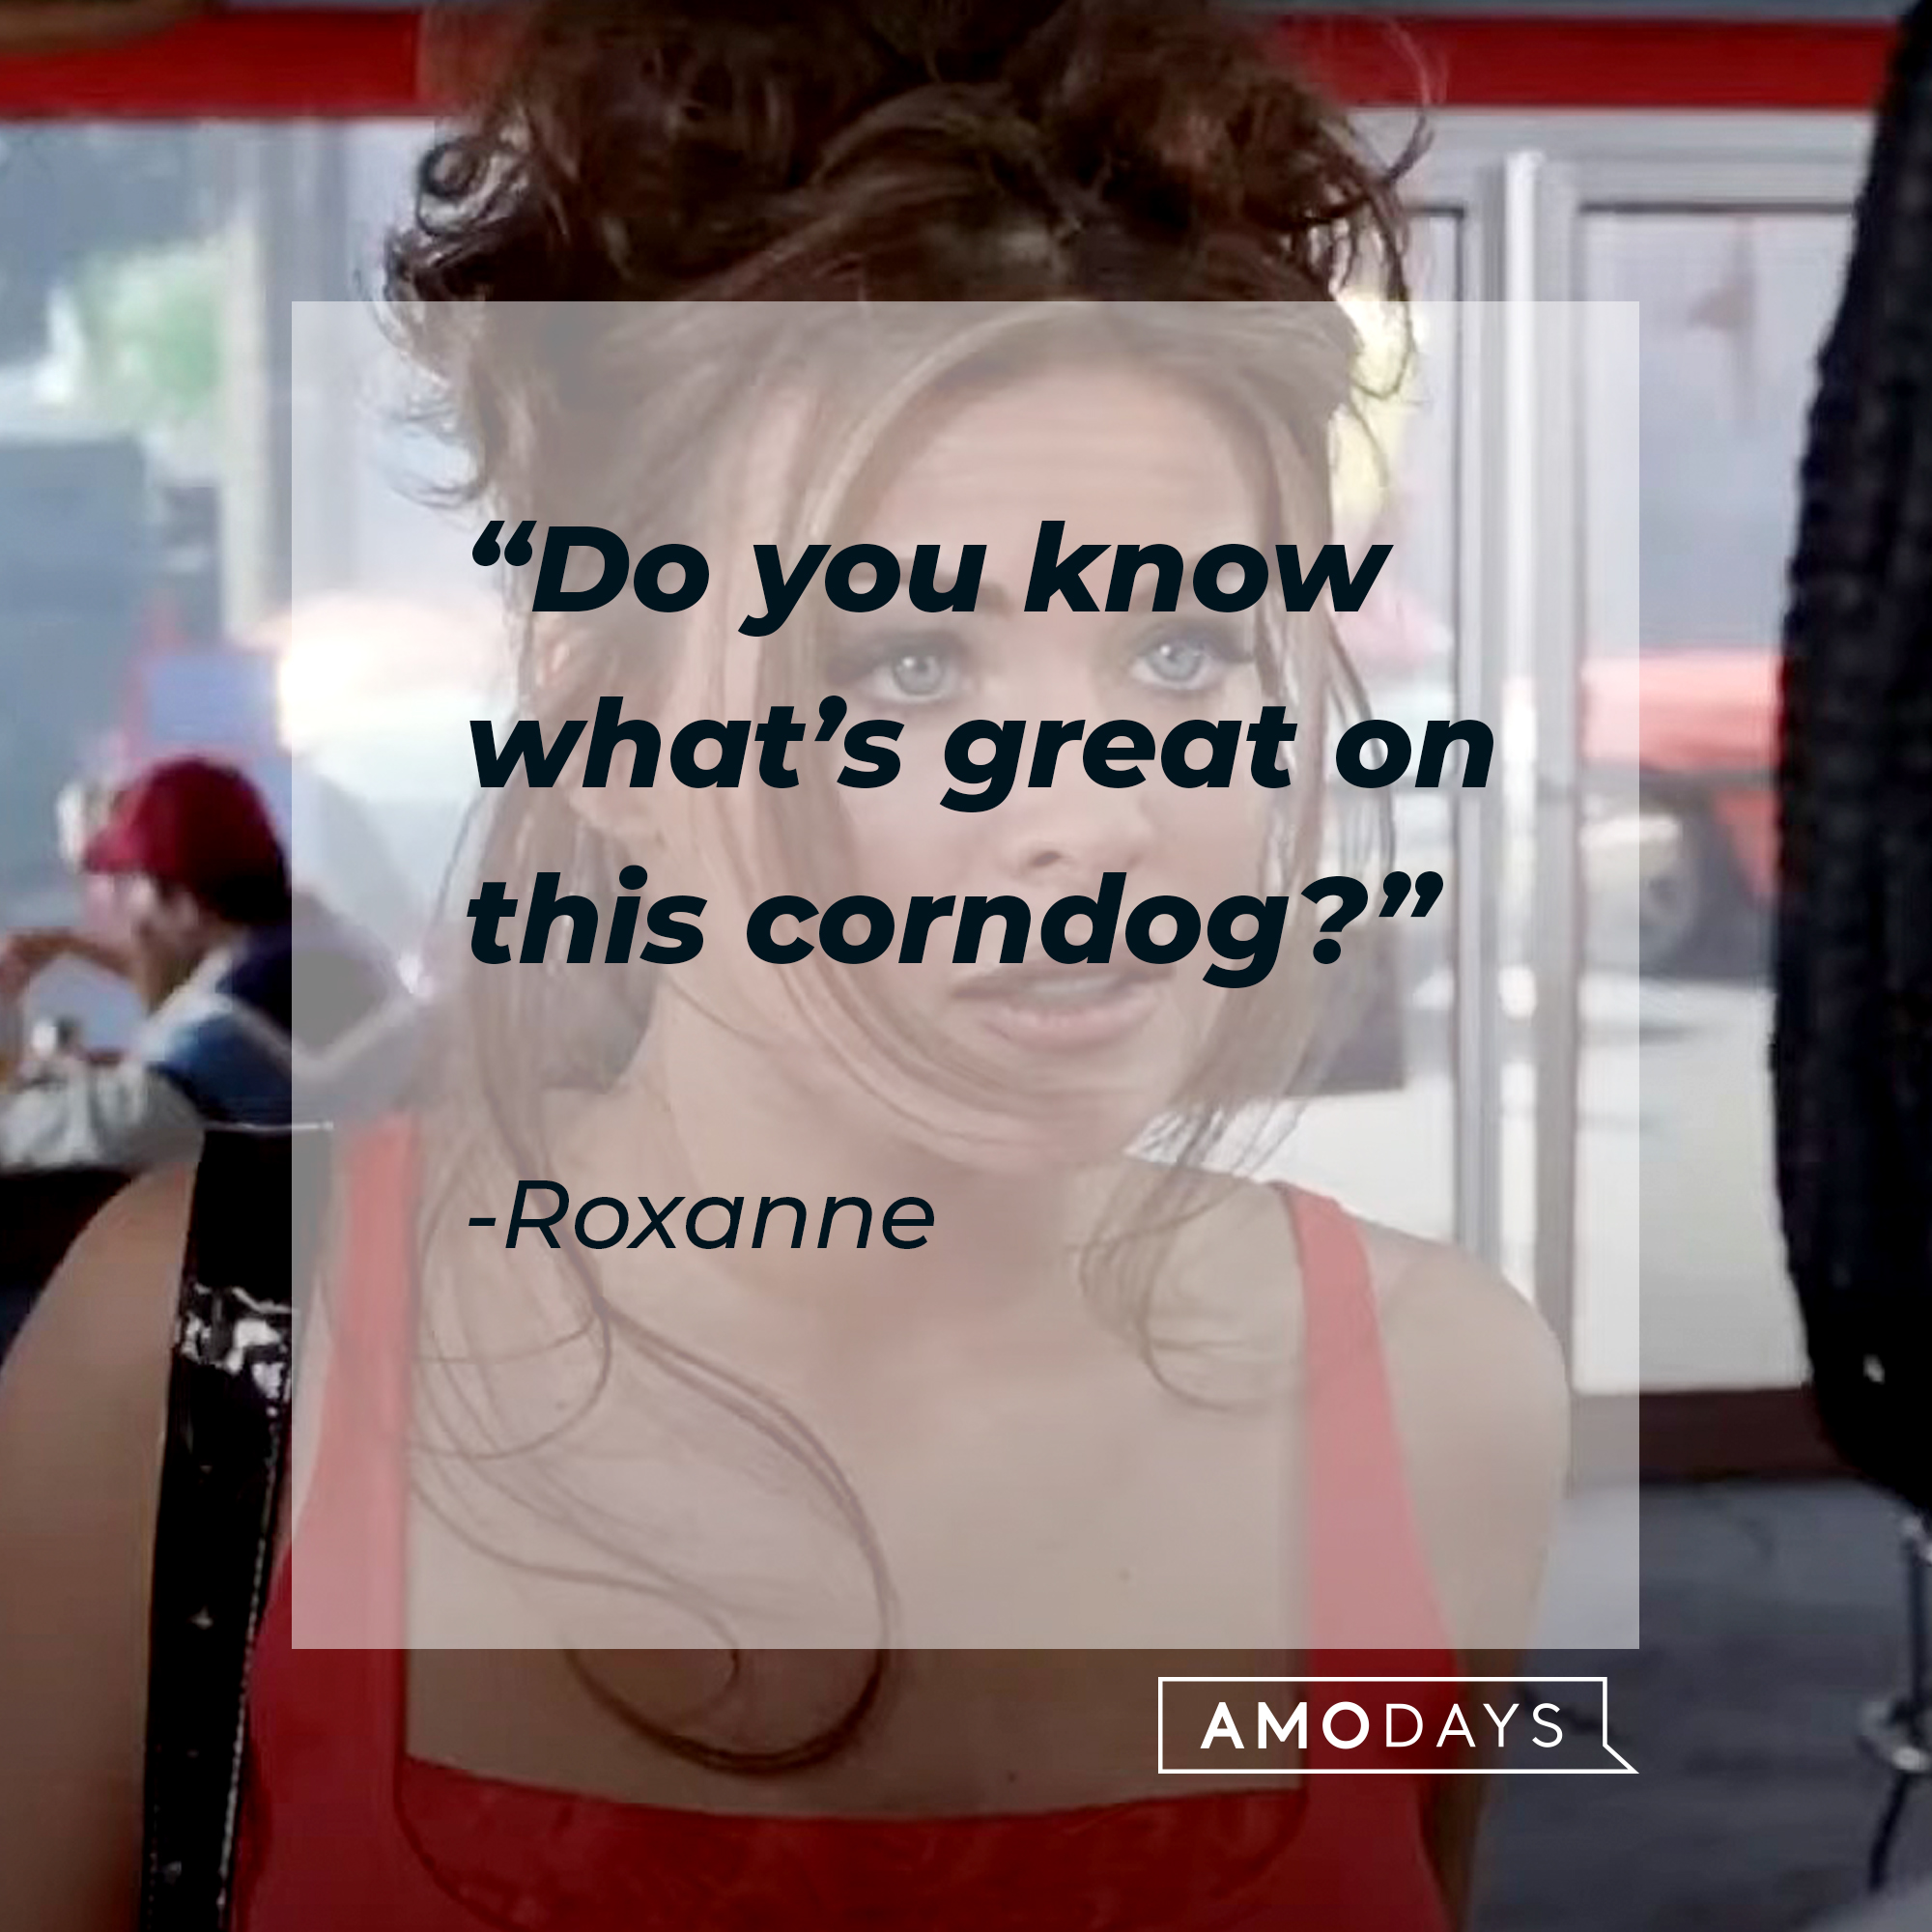 An image of Roxanne with her quote: “Do you know what’s great on this corndog?” | Source: AmoDays